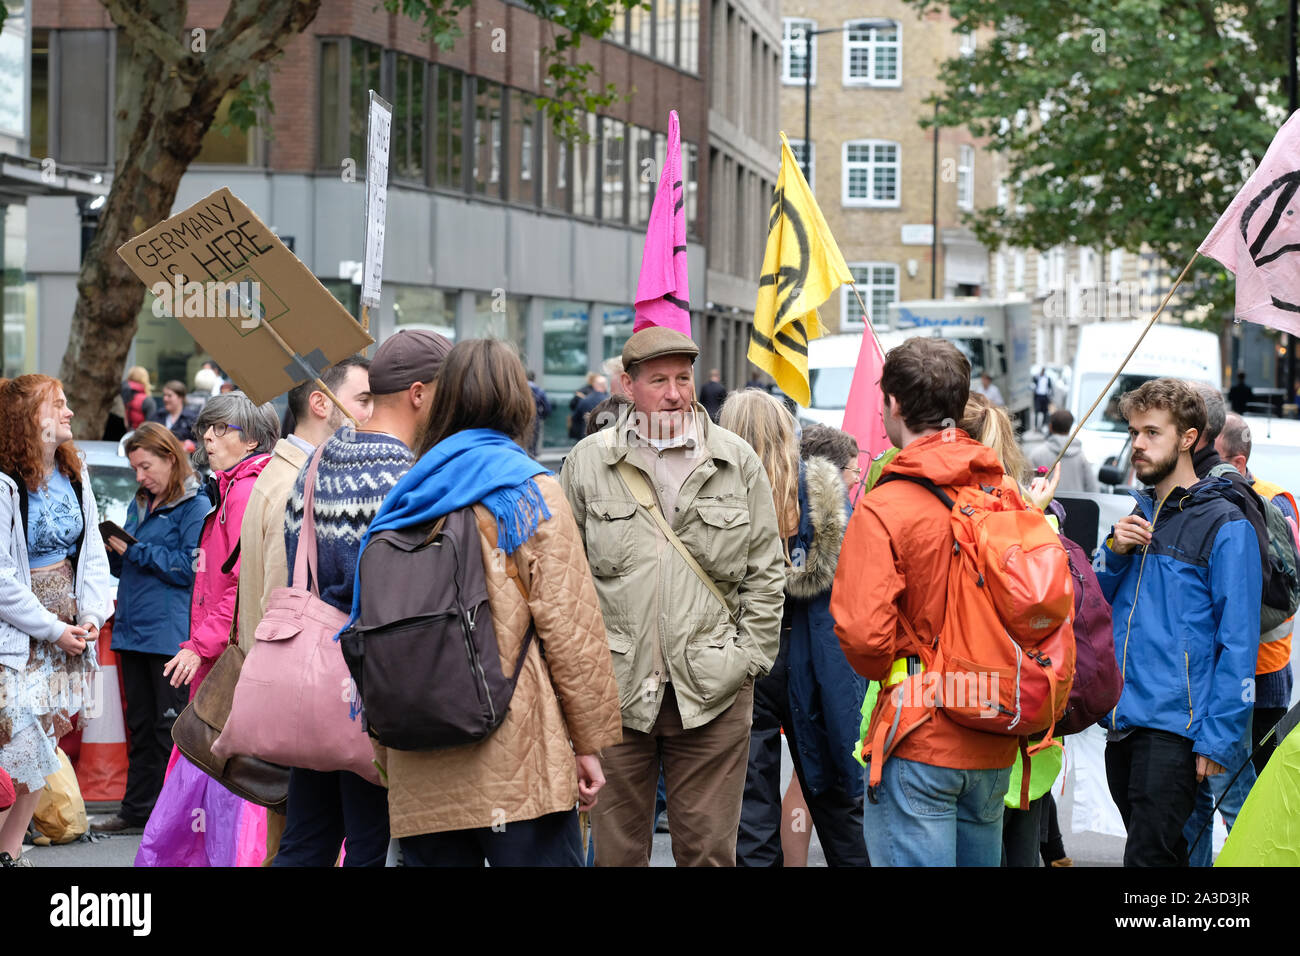 Westminster, London, UK - Monday 7th October 2019 - Extinction Rebellion XR climate protesters gather in Marsham Street near the Home Office. Photo Steven May / Alamy Live News Stock Photo